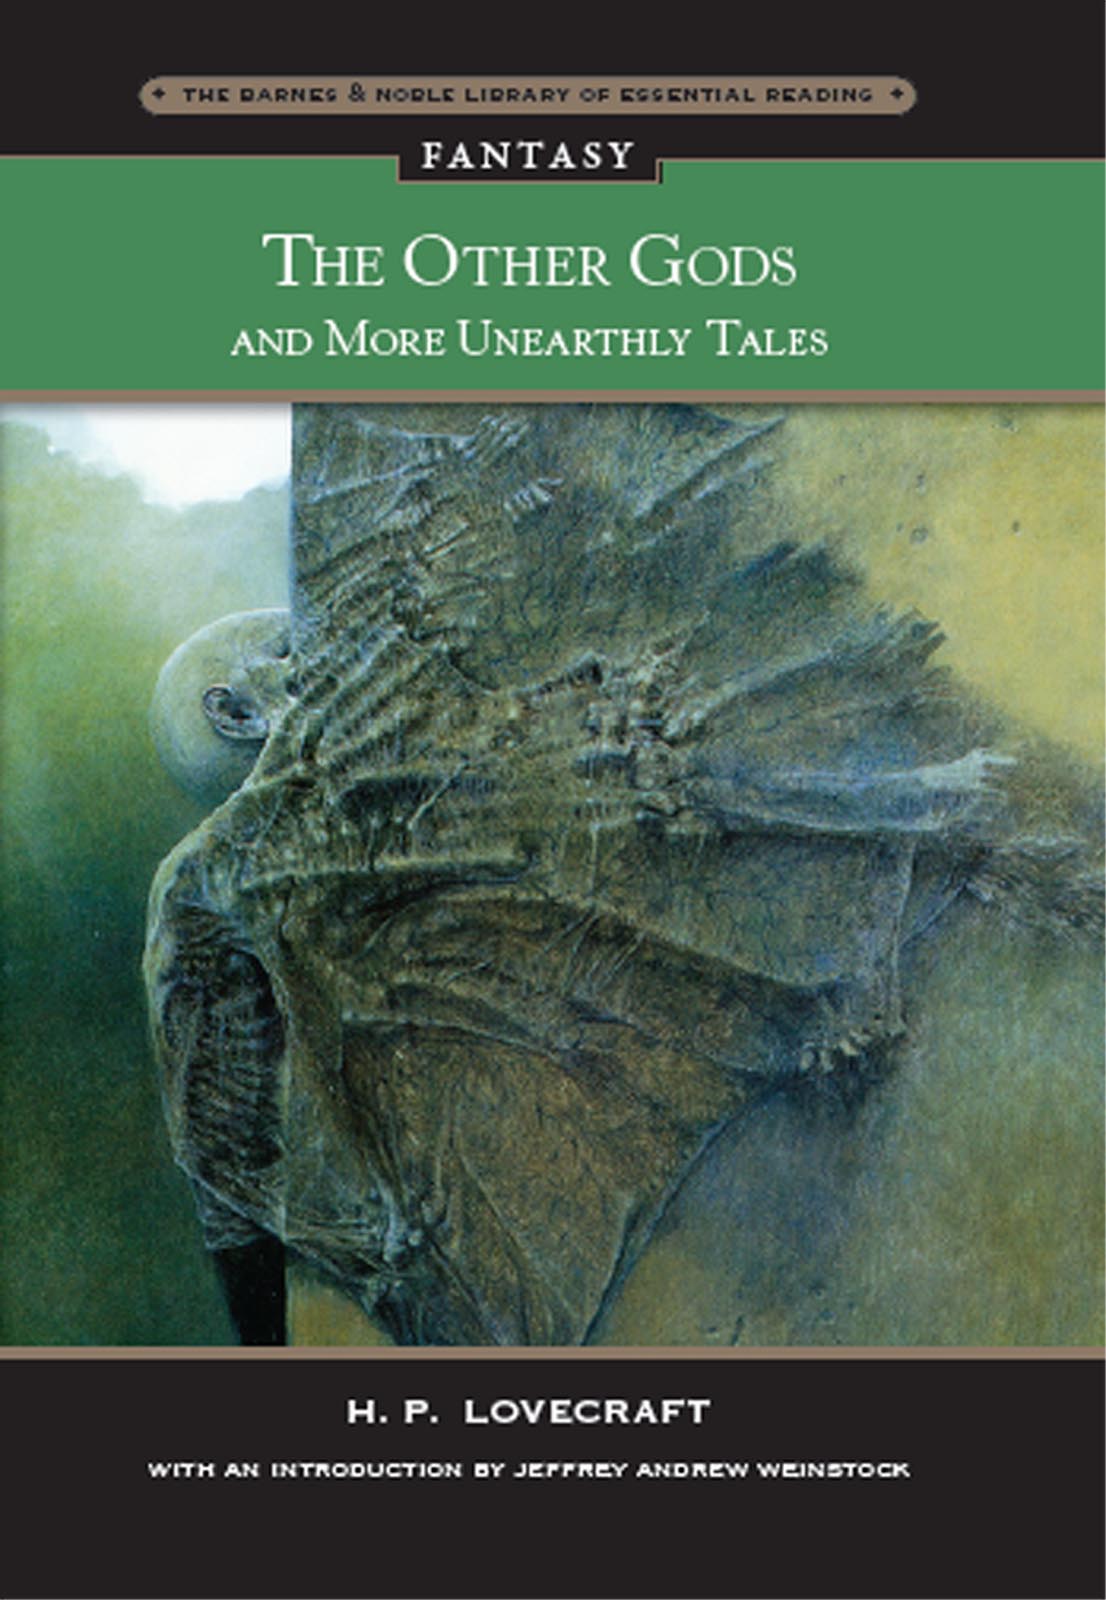 The Other Gods and More Unearthly Tales by H.P. Lovecraft